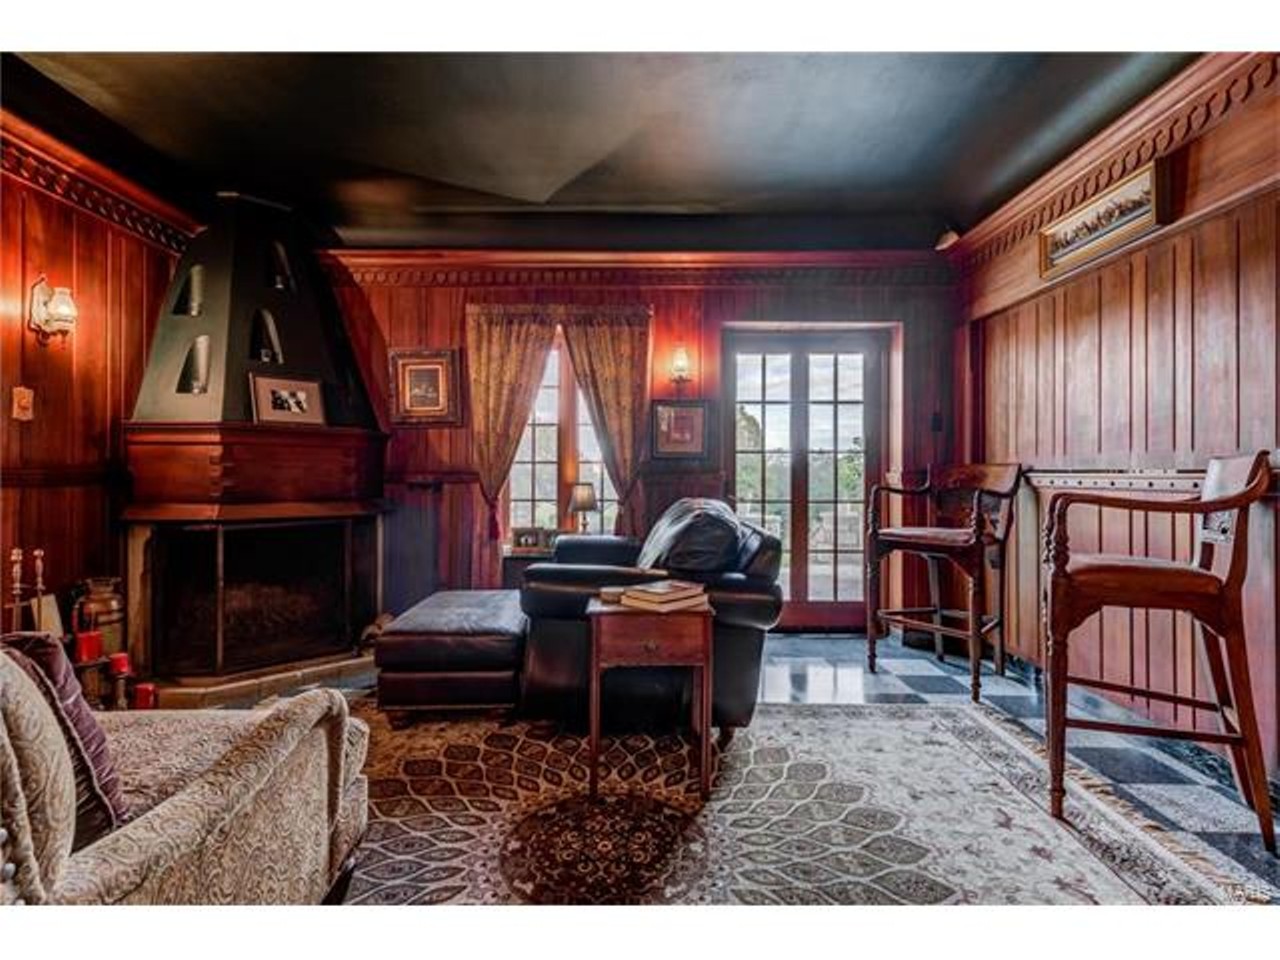 Photographs of "The Castle of Montebello" on Montebello Road in Imperial, Missouri for Dielmann Sotheby's International Realty agent Ted Wight